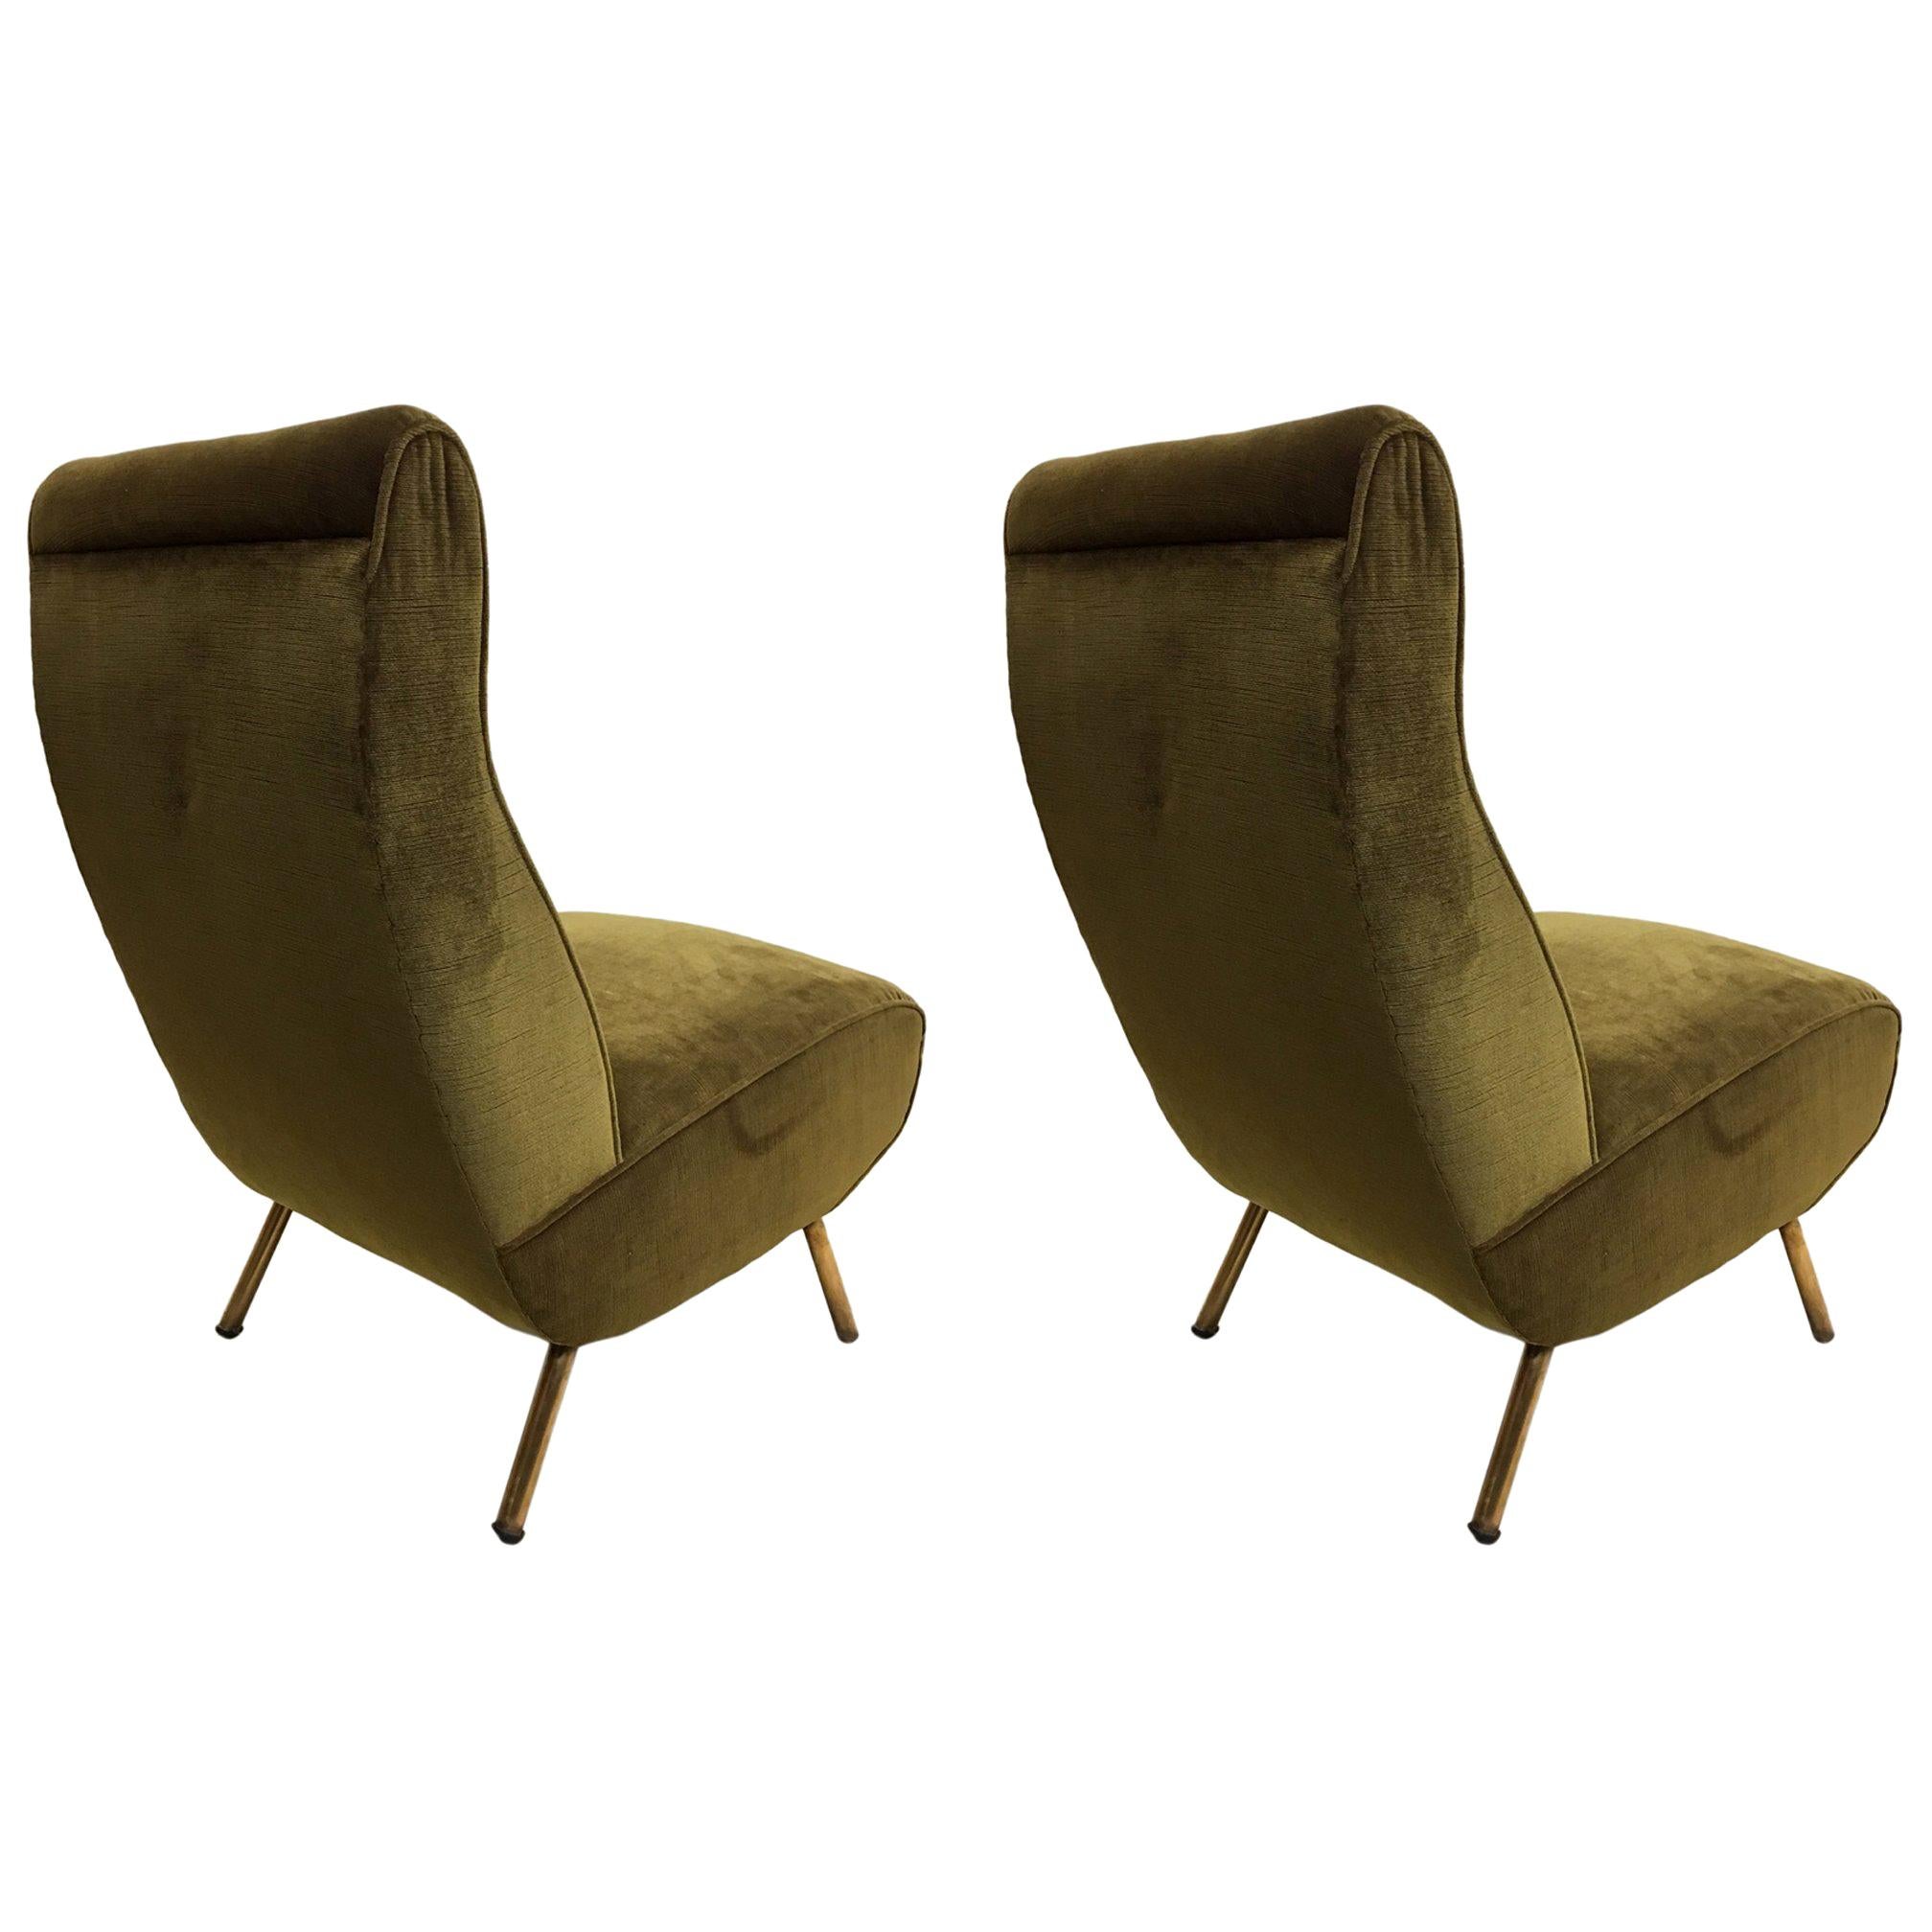 Rare Pair of Mid-Century Modern Triennale Lounge Chairs, Marco Zanuso Italy 1951 For Sale